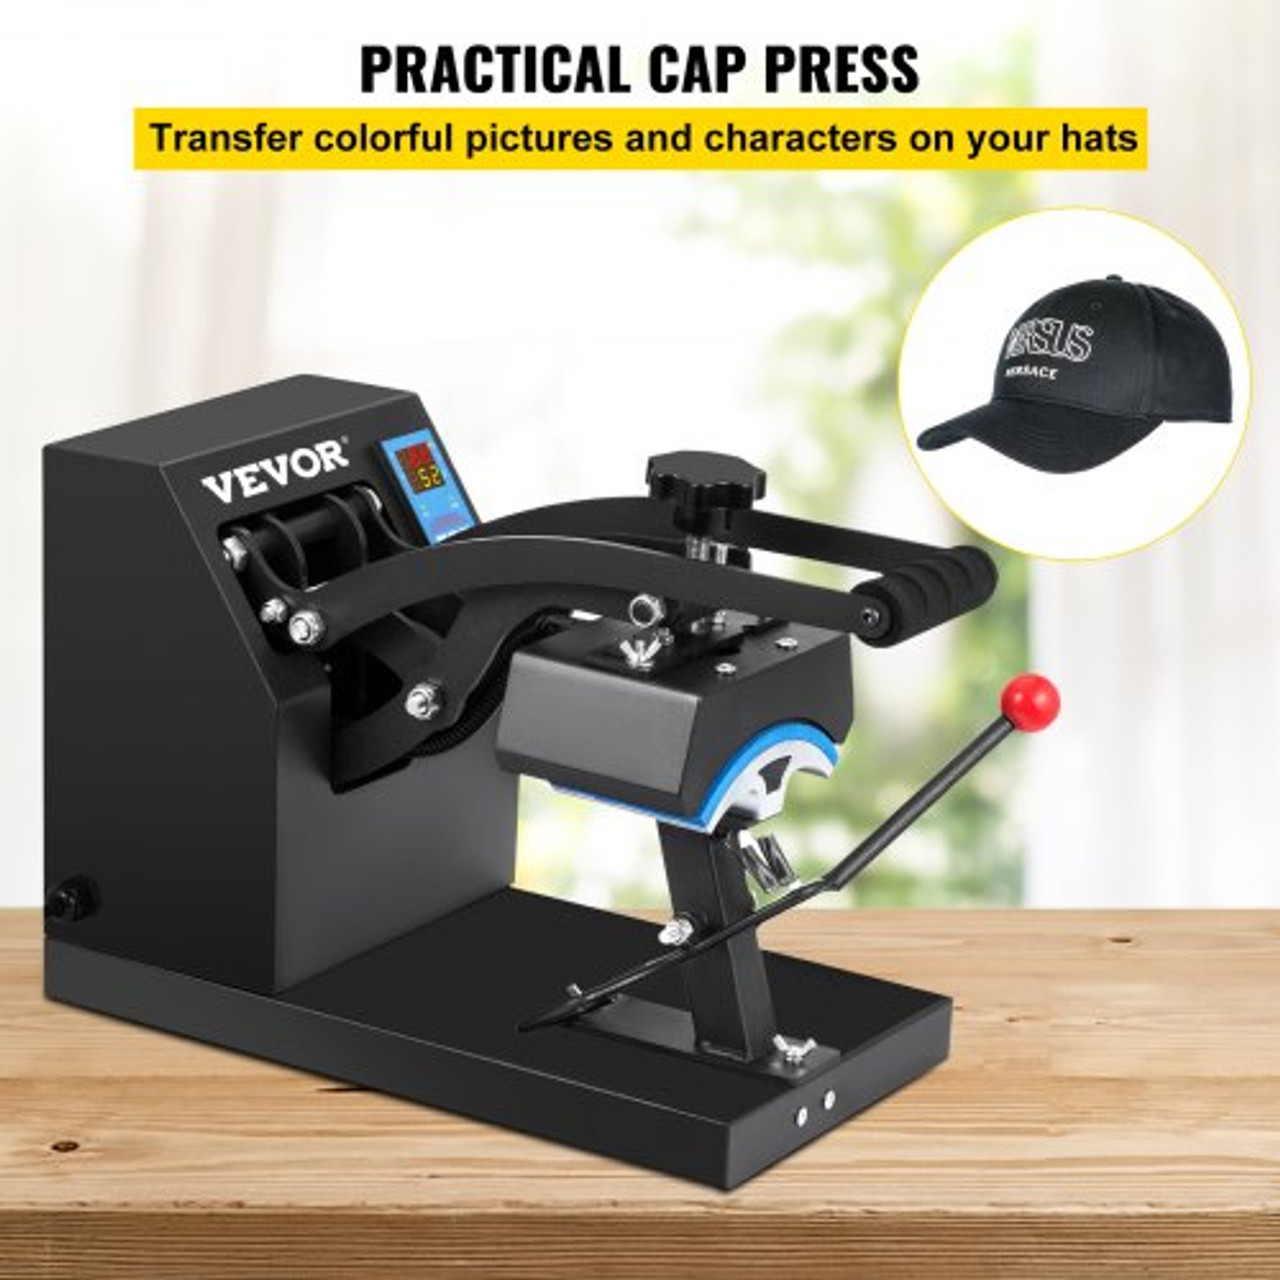 Heat Press 6x3.75Inch Curved Element Hat Press Clamshell Design